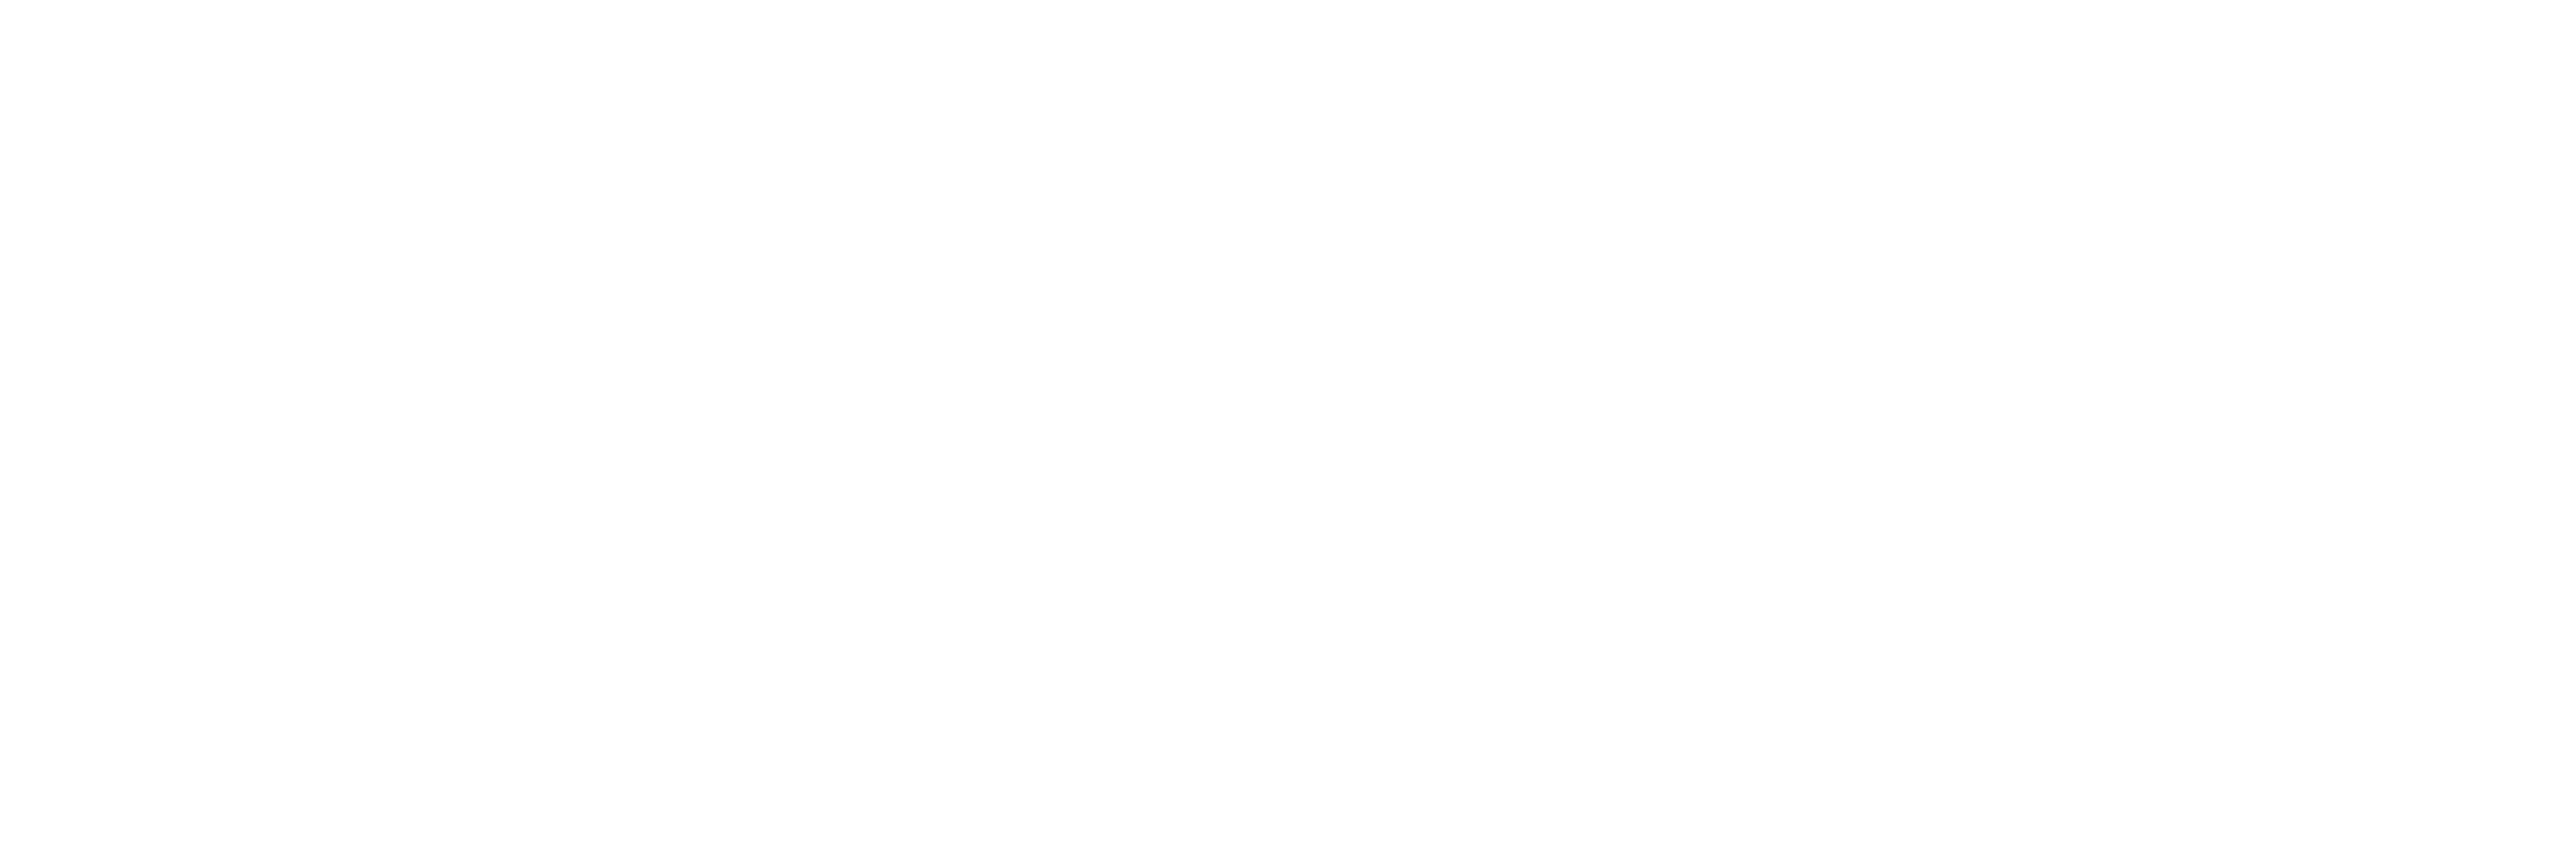 IndustrialCLE.com